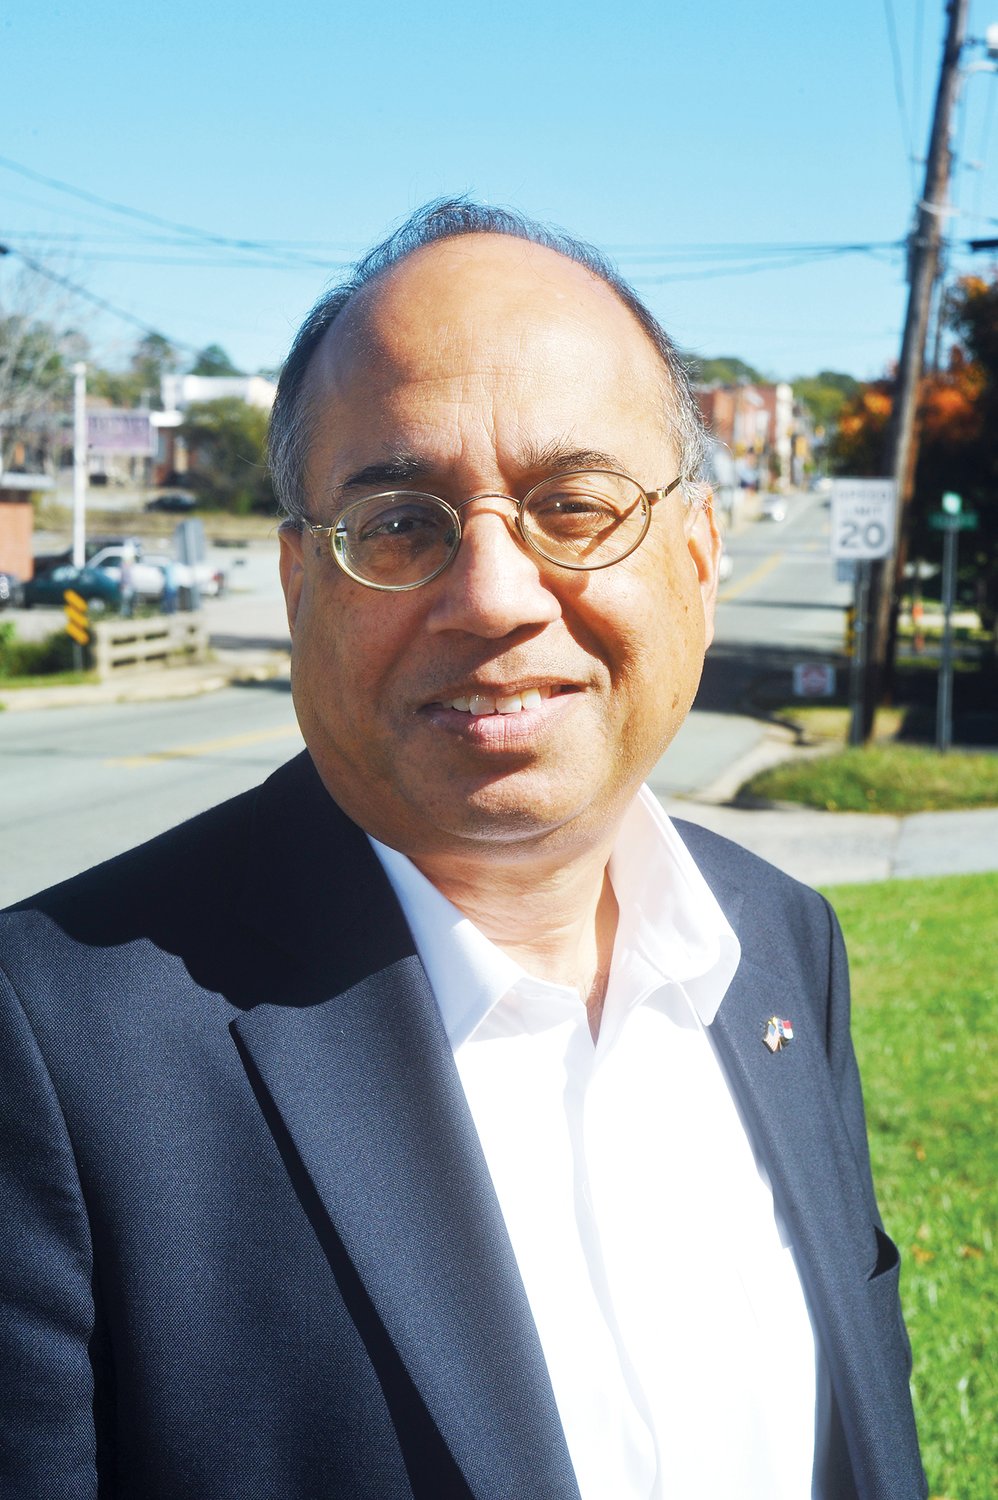 Atul Goel, a candidate for U.S. Senate, stopped by Siler City Nov. 1 as part of his goal to visit 100 counties in North Carolina. His stop in Chatham County included a visit to the Whiskey Barrel Cafe on W. Raleigh Street in Siler City.